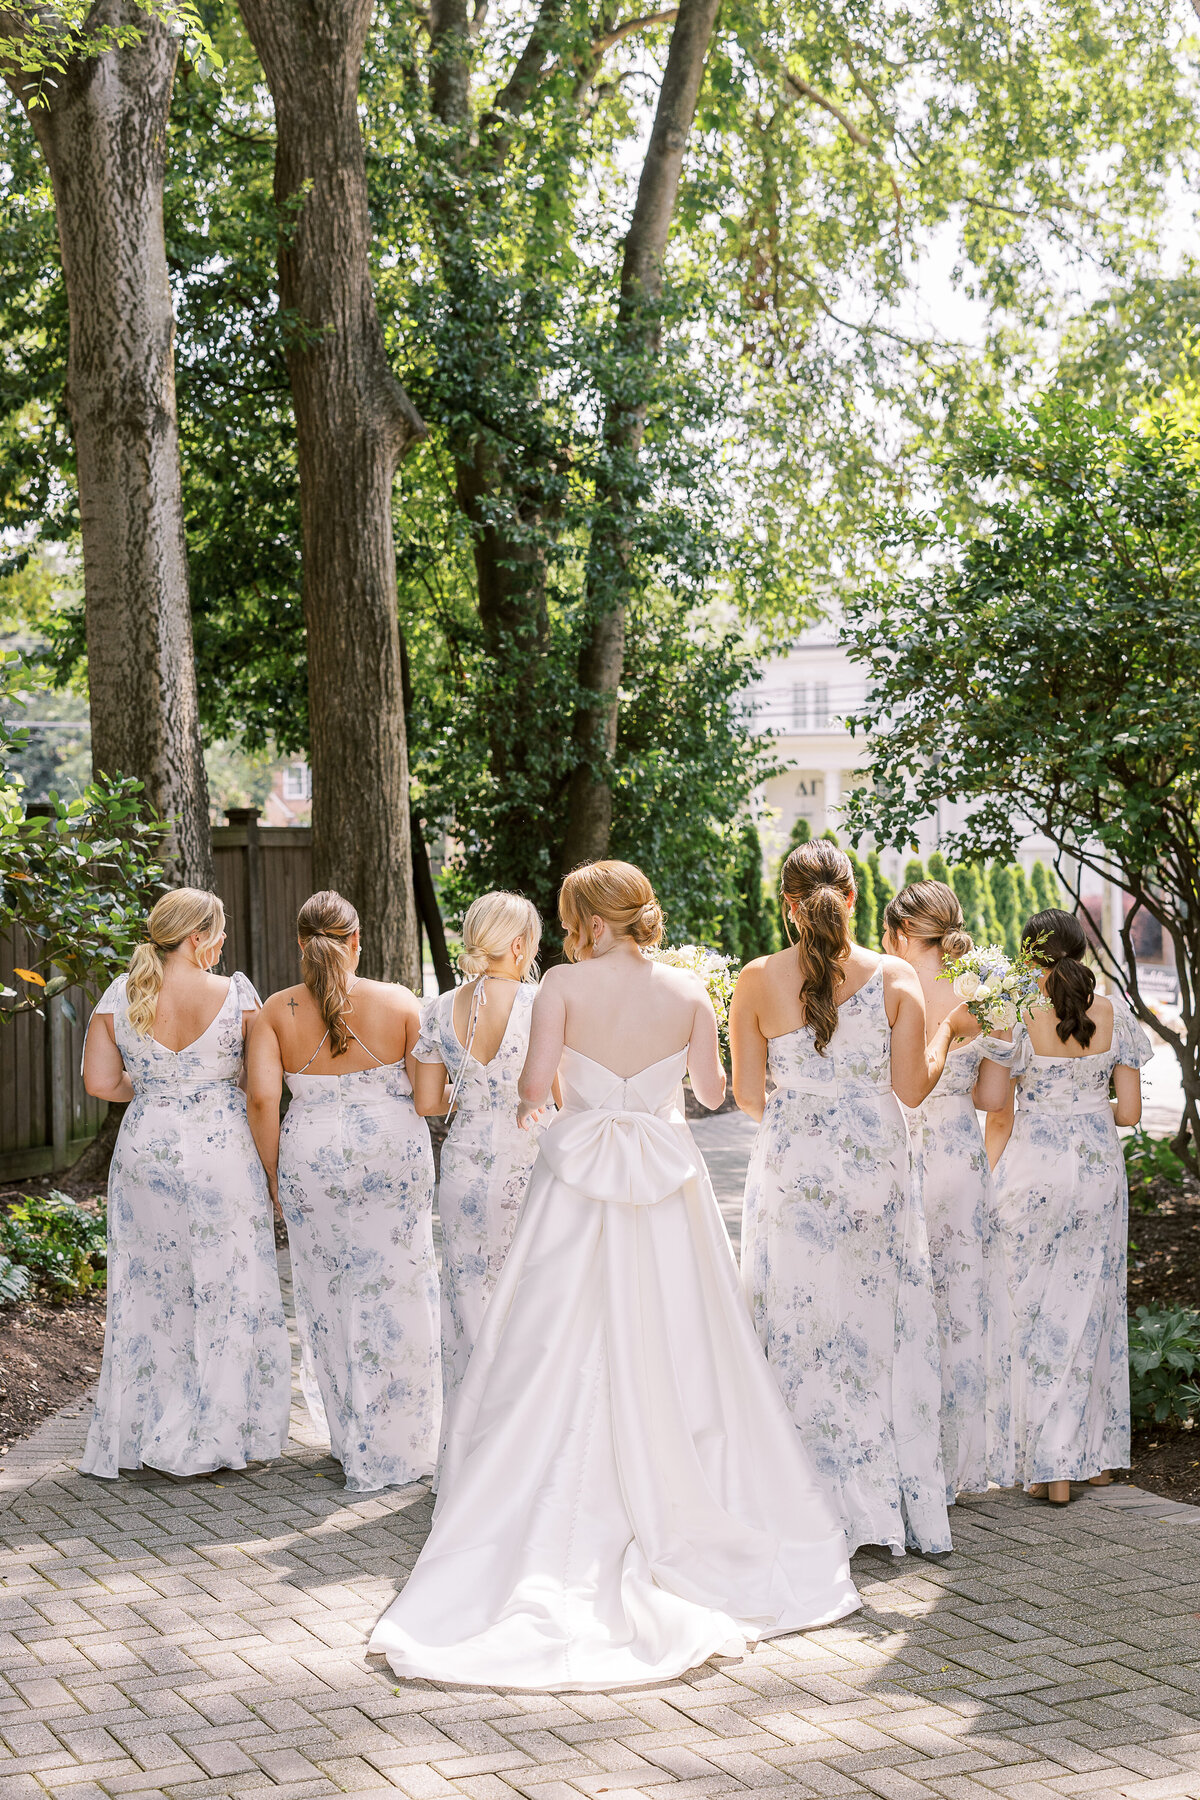 Bride and bridesmaids from behind